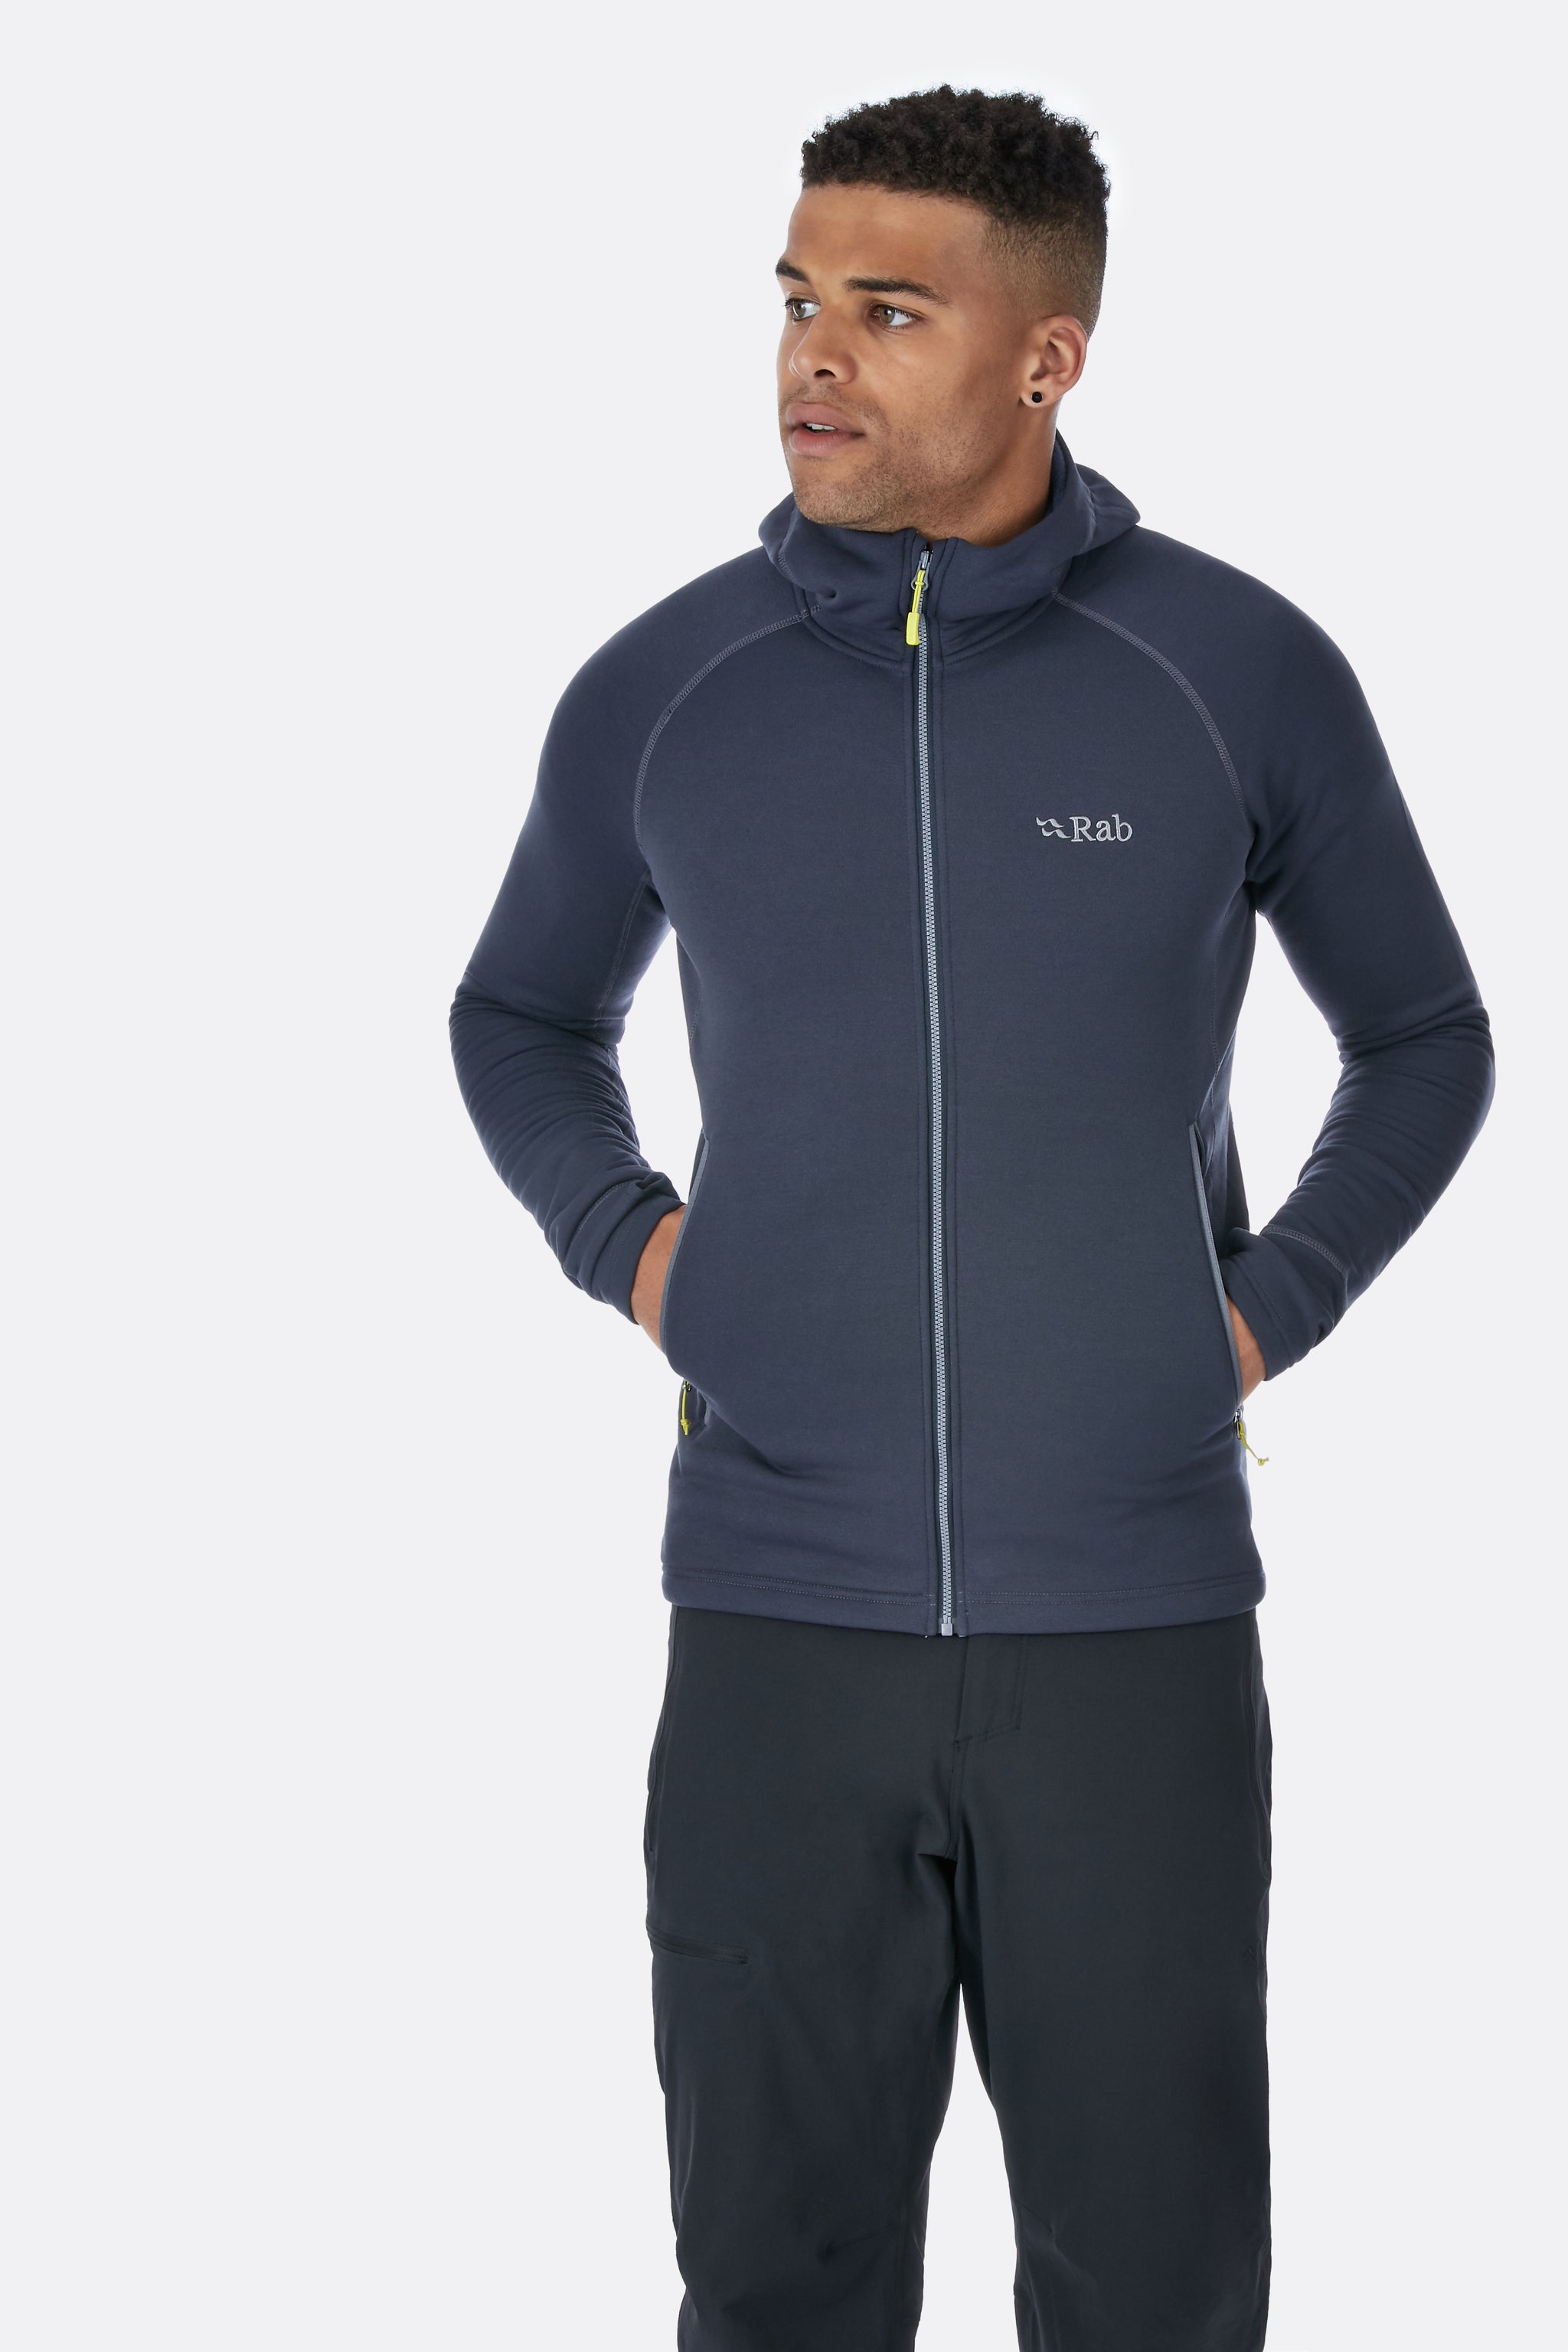 Rab Men's Power Stretch Pro Jacket - Outfitters Store